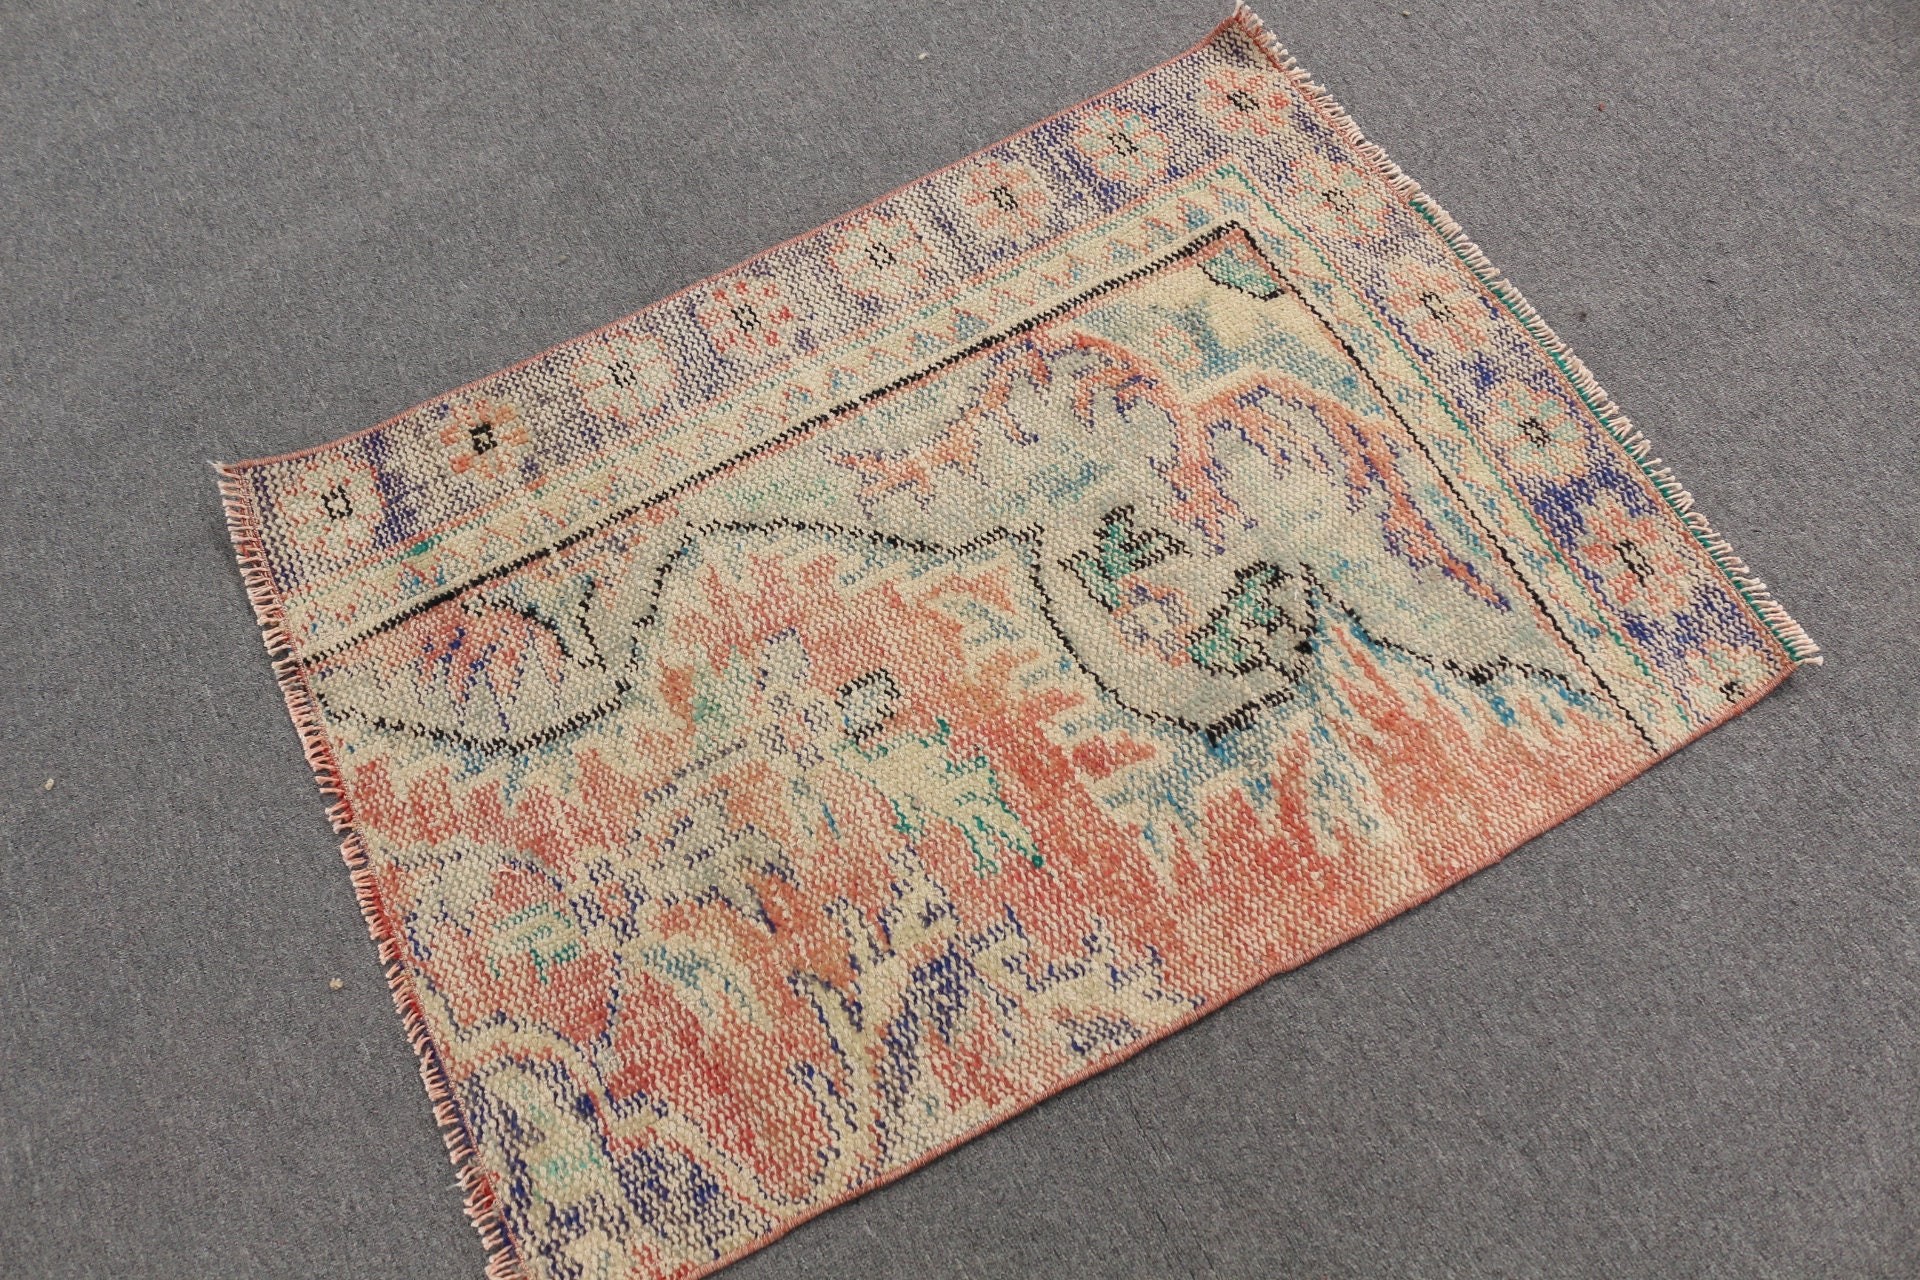 Bathroom Rug, Car Mat Rug, Vintage Rug, Turkish Rugs, Red Antique Rug, Kitchen Rugs, Cool Rug, Rugs for Car Mat, 2.7x3.5 ft Small Rugs